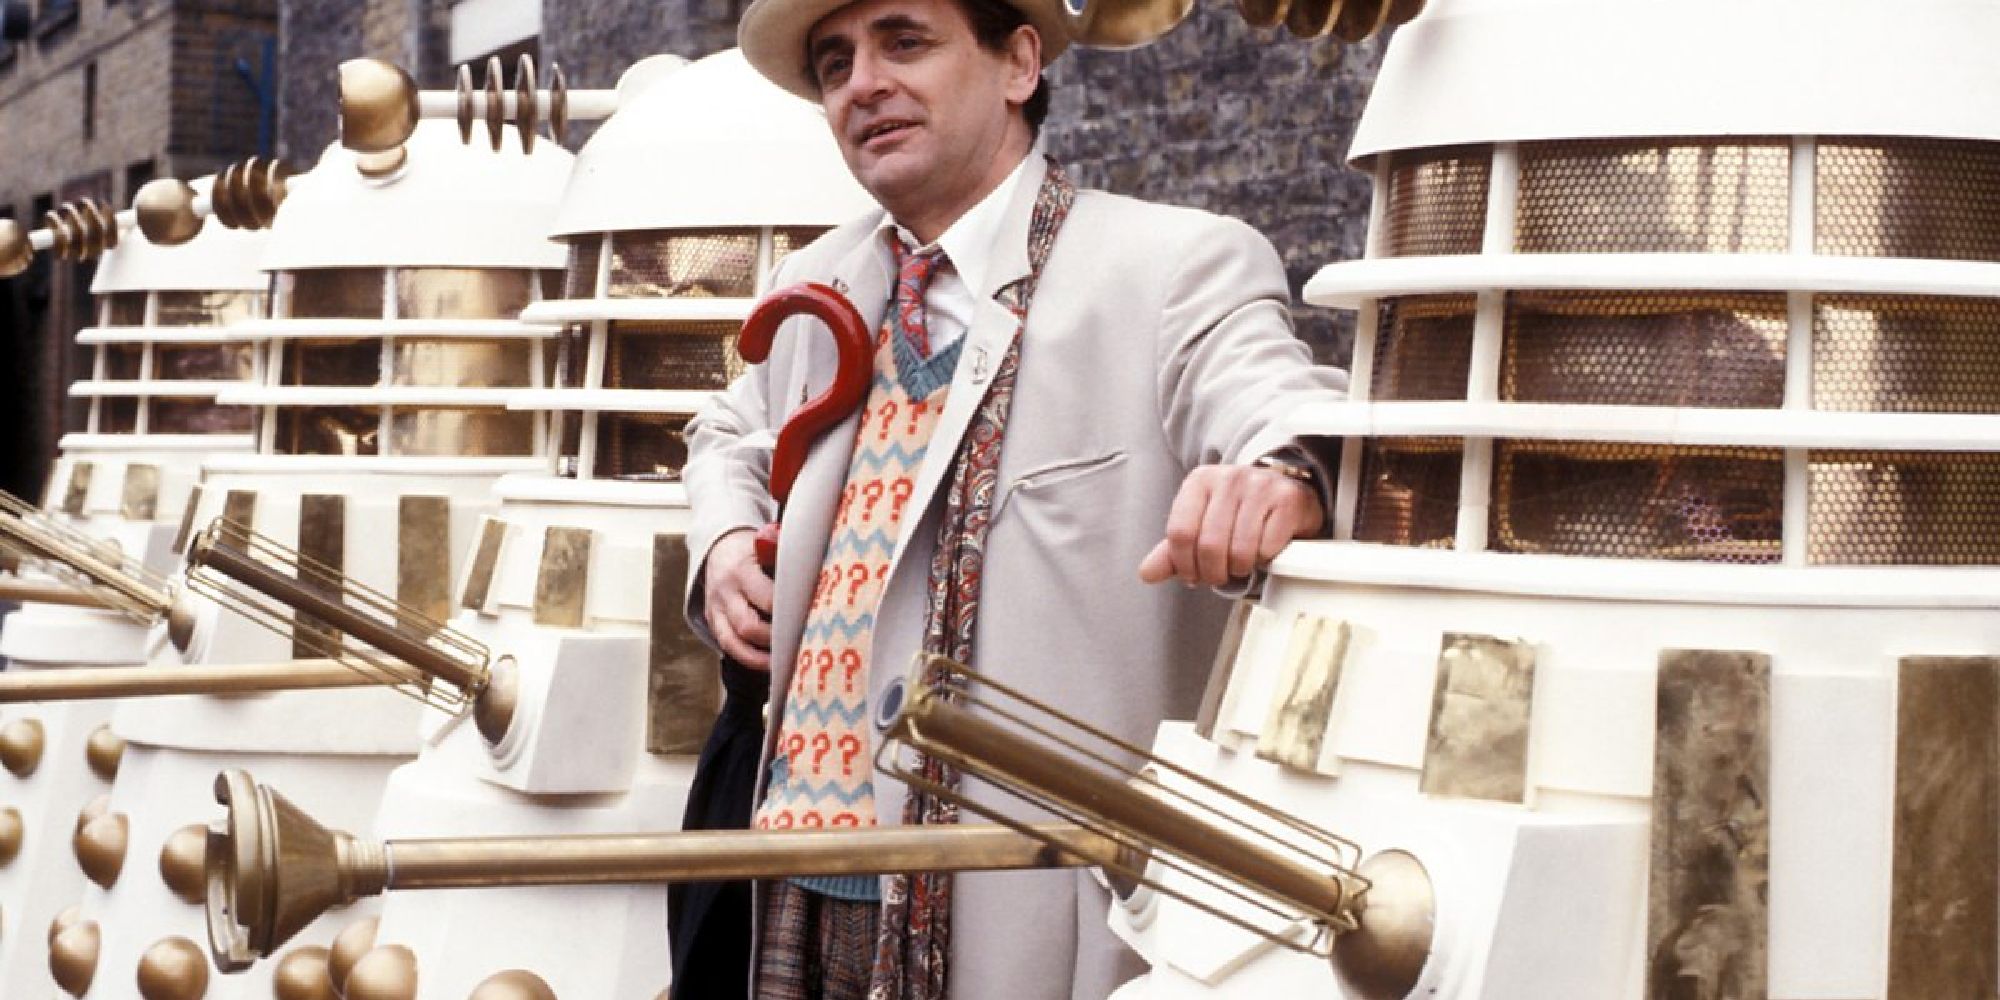 The 7th Doctor standing in a line of white-and-gold daleks in Doctor Who's Remembrance of the Daleks